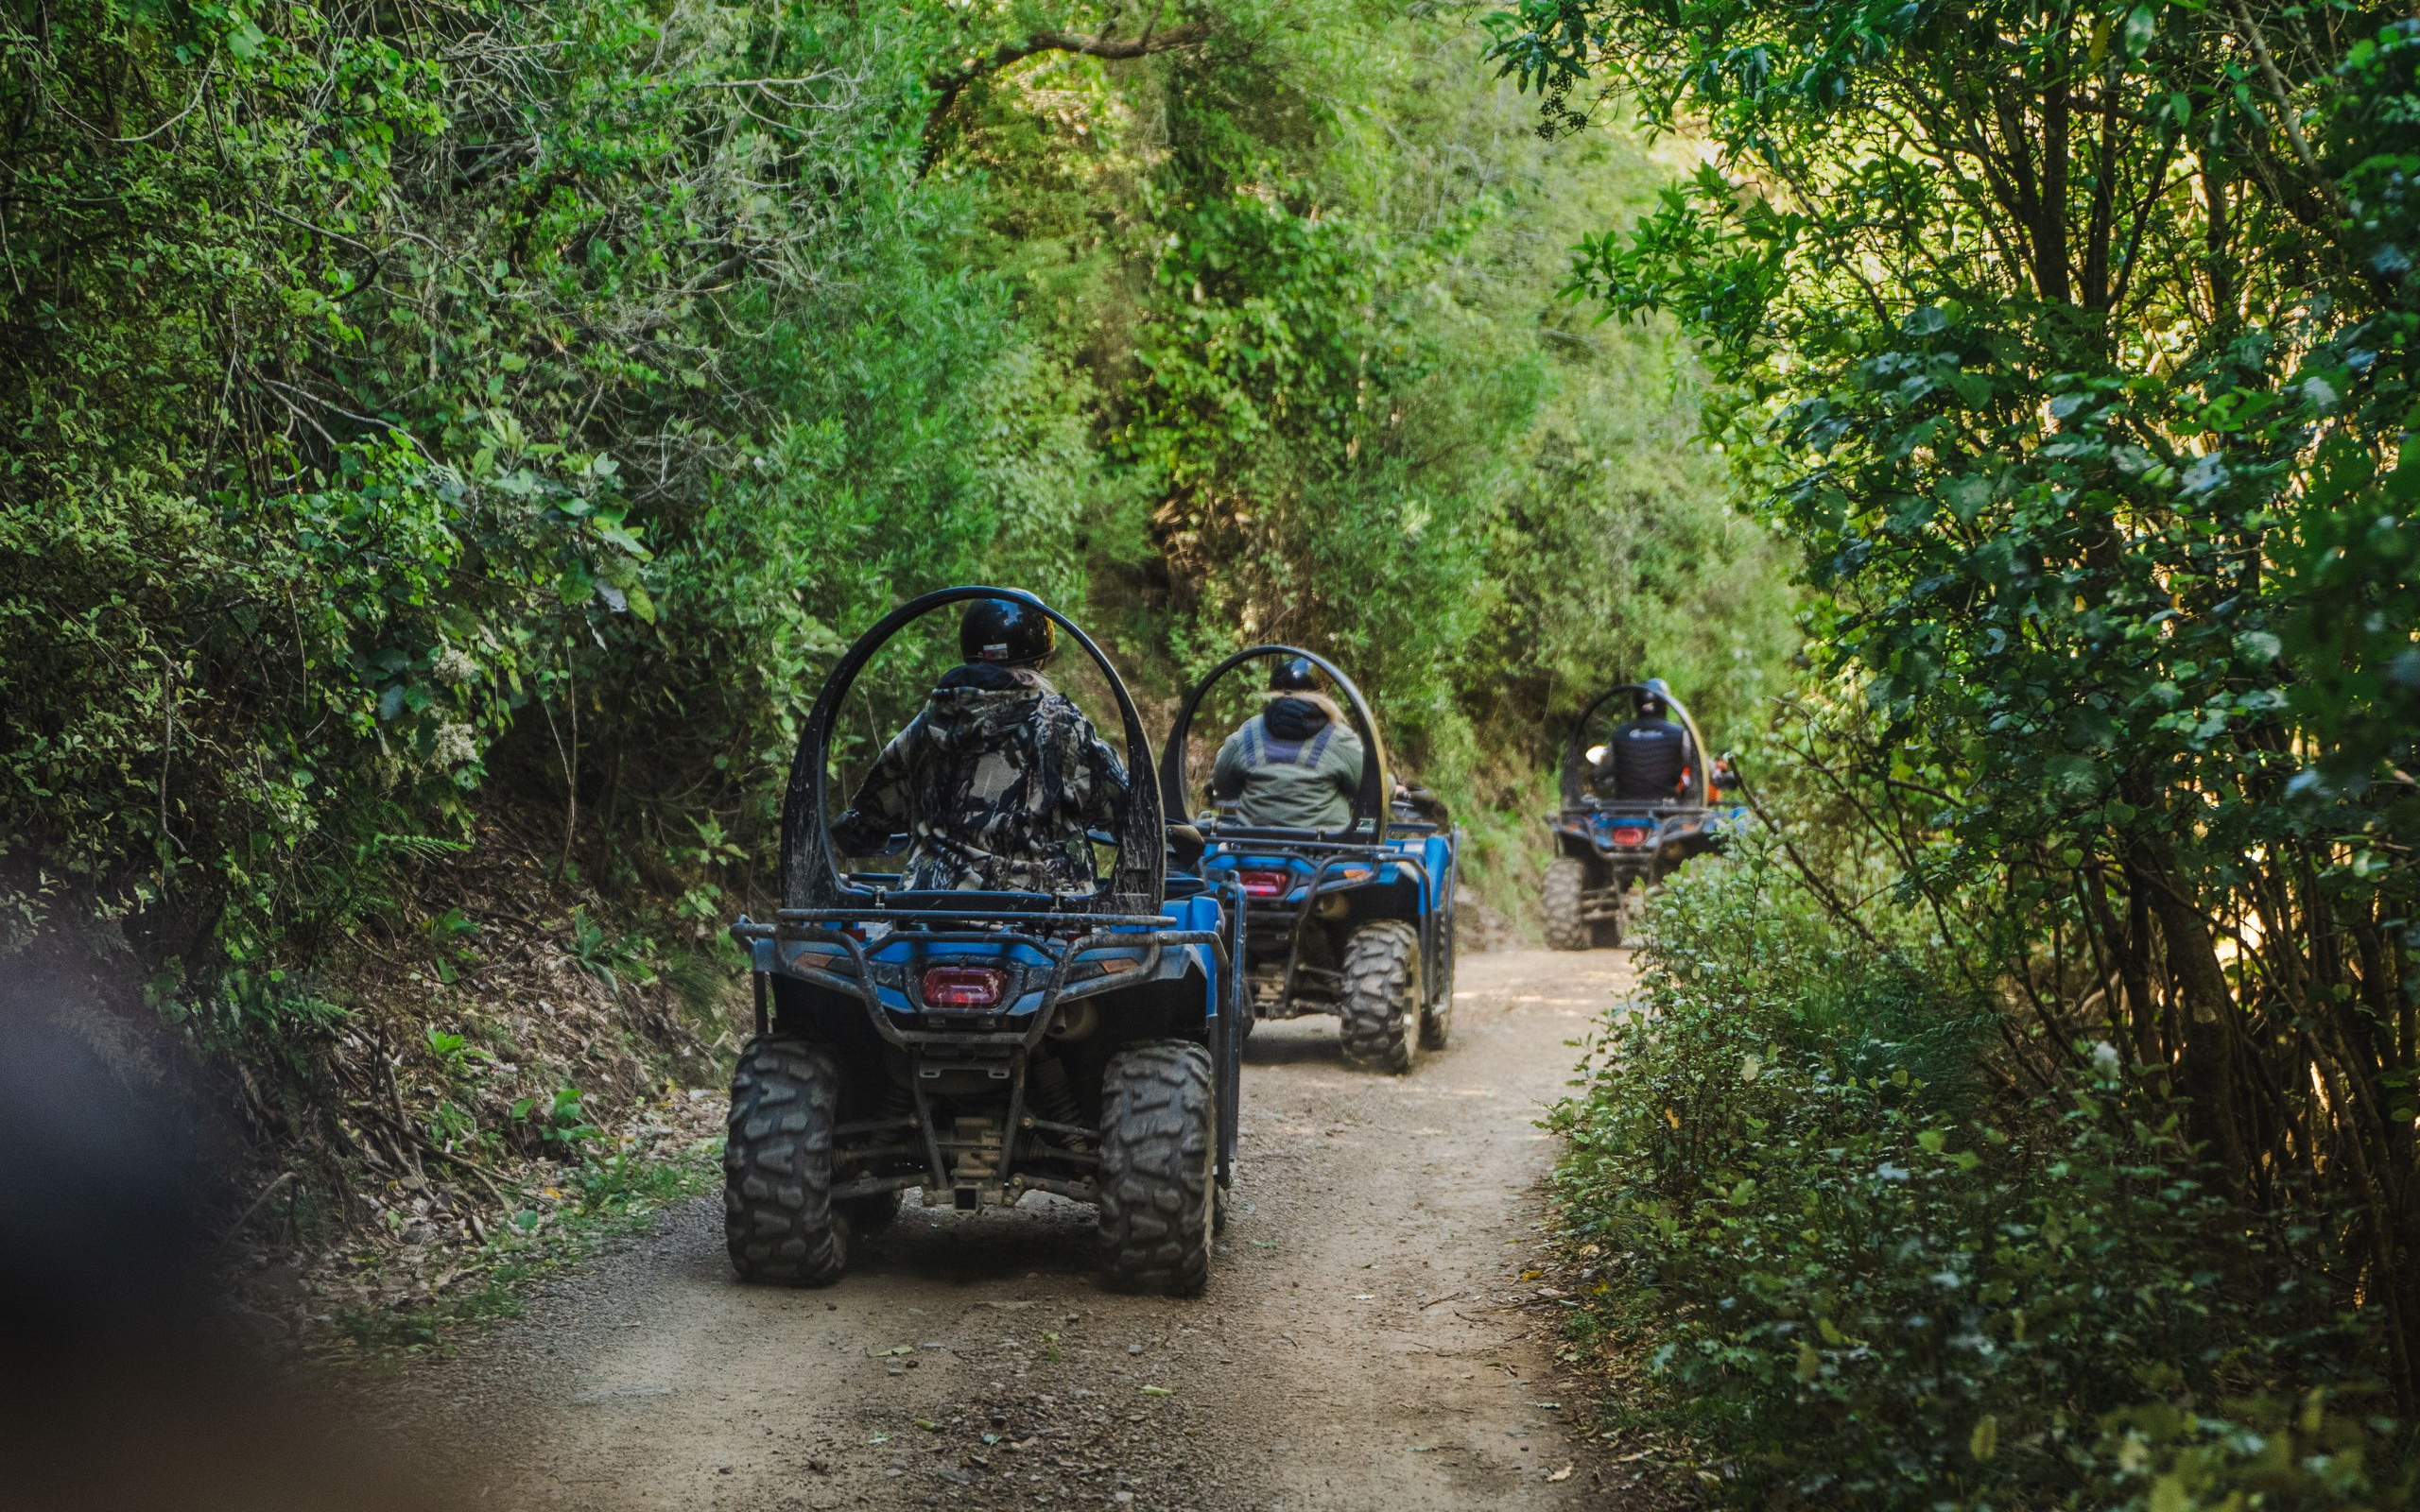 Quadbiking at Cable Bay Adventure Park by Roady